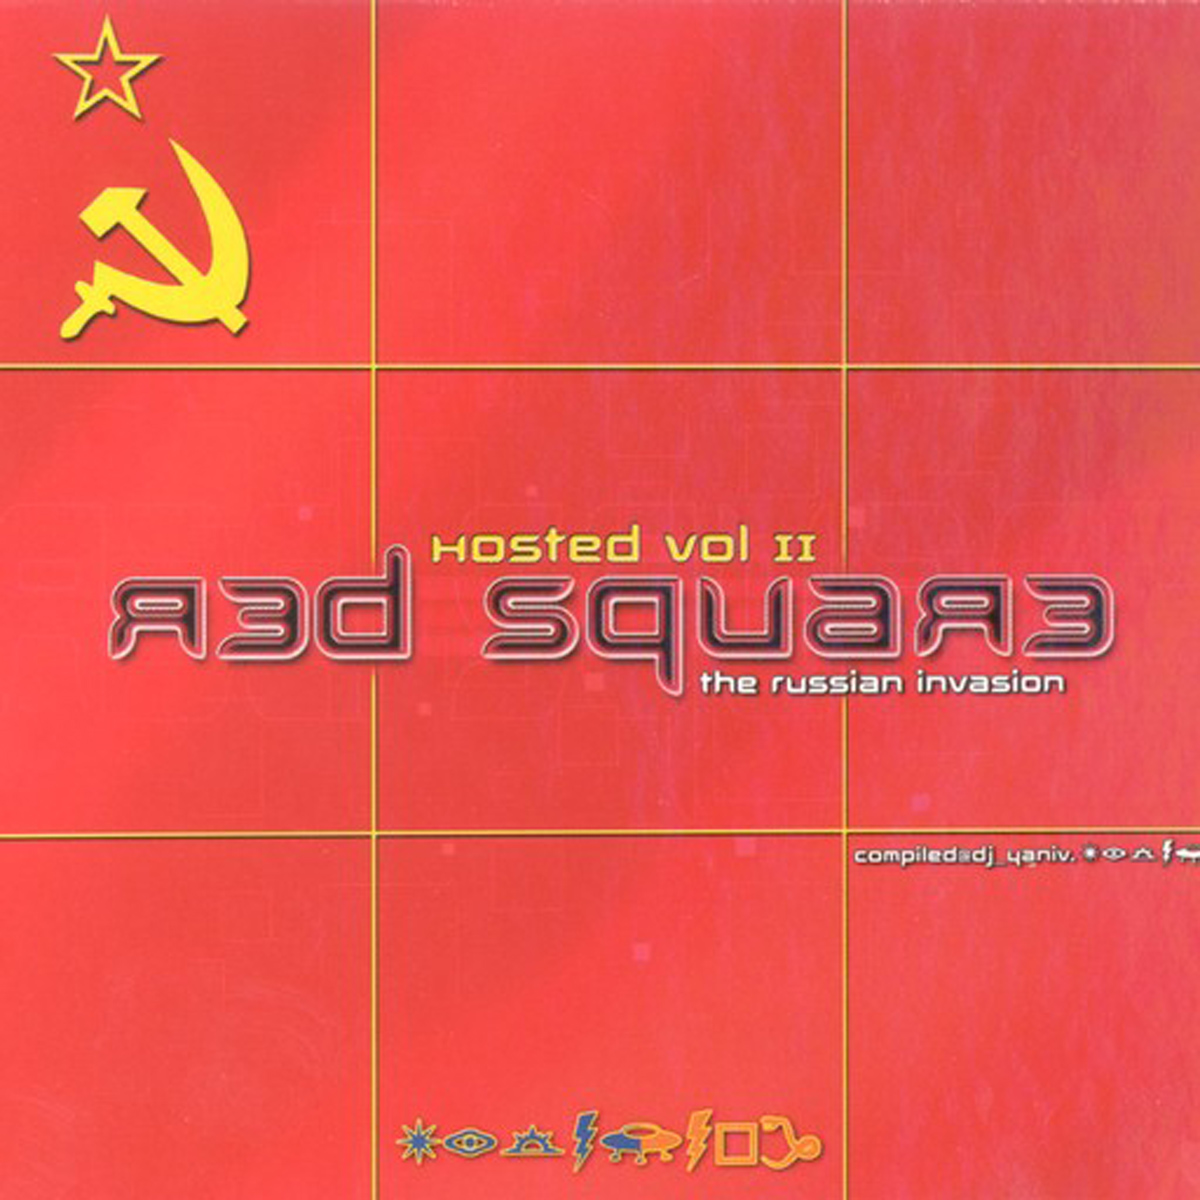 Hosted Vol. II - Red Square